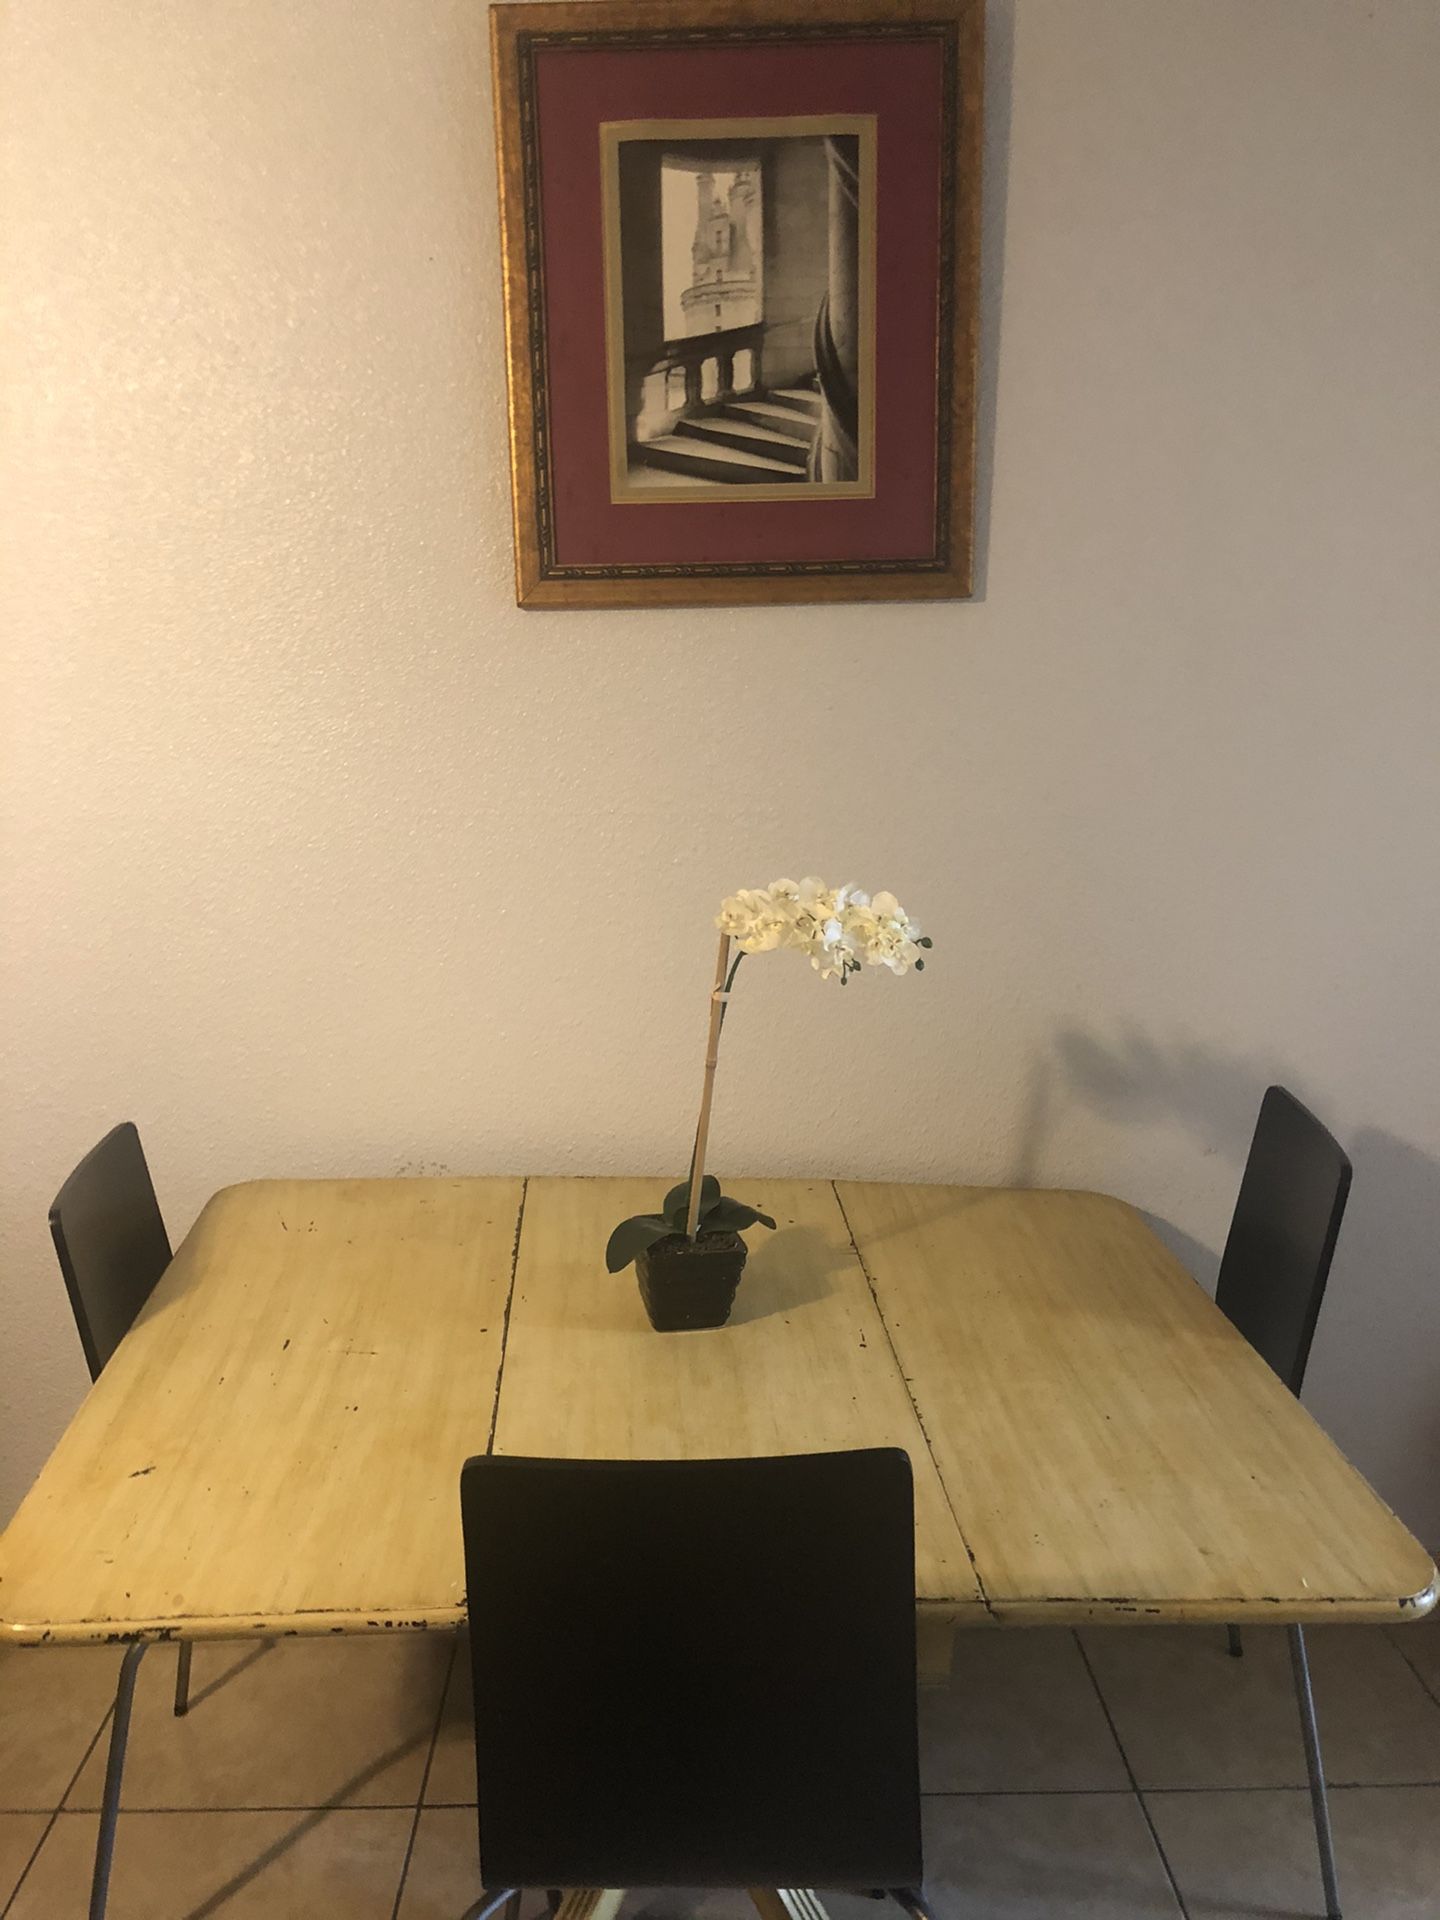 Antique wooden table with 4 chairs